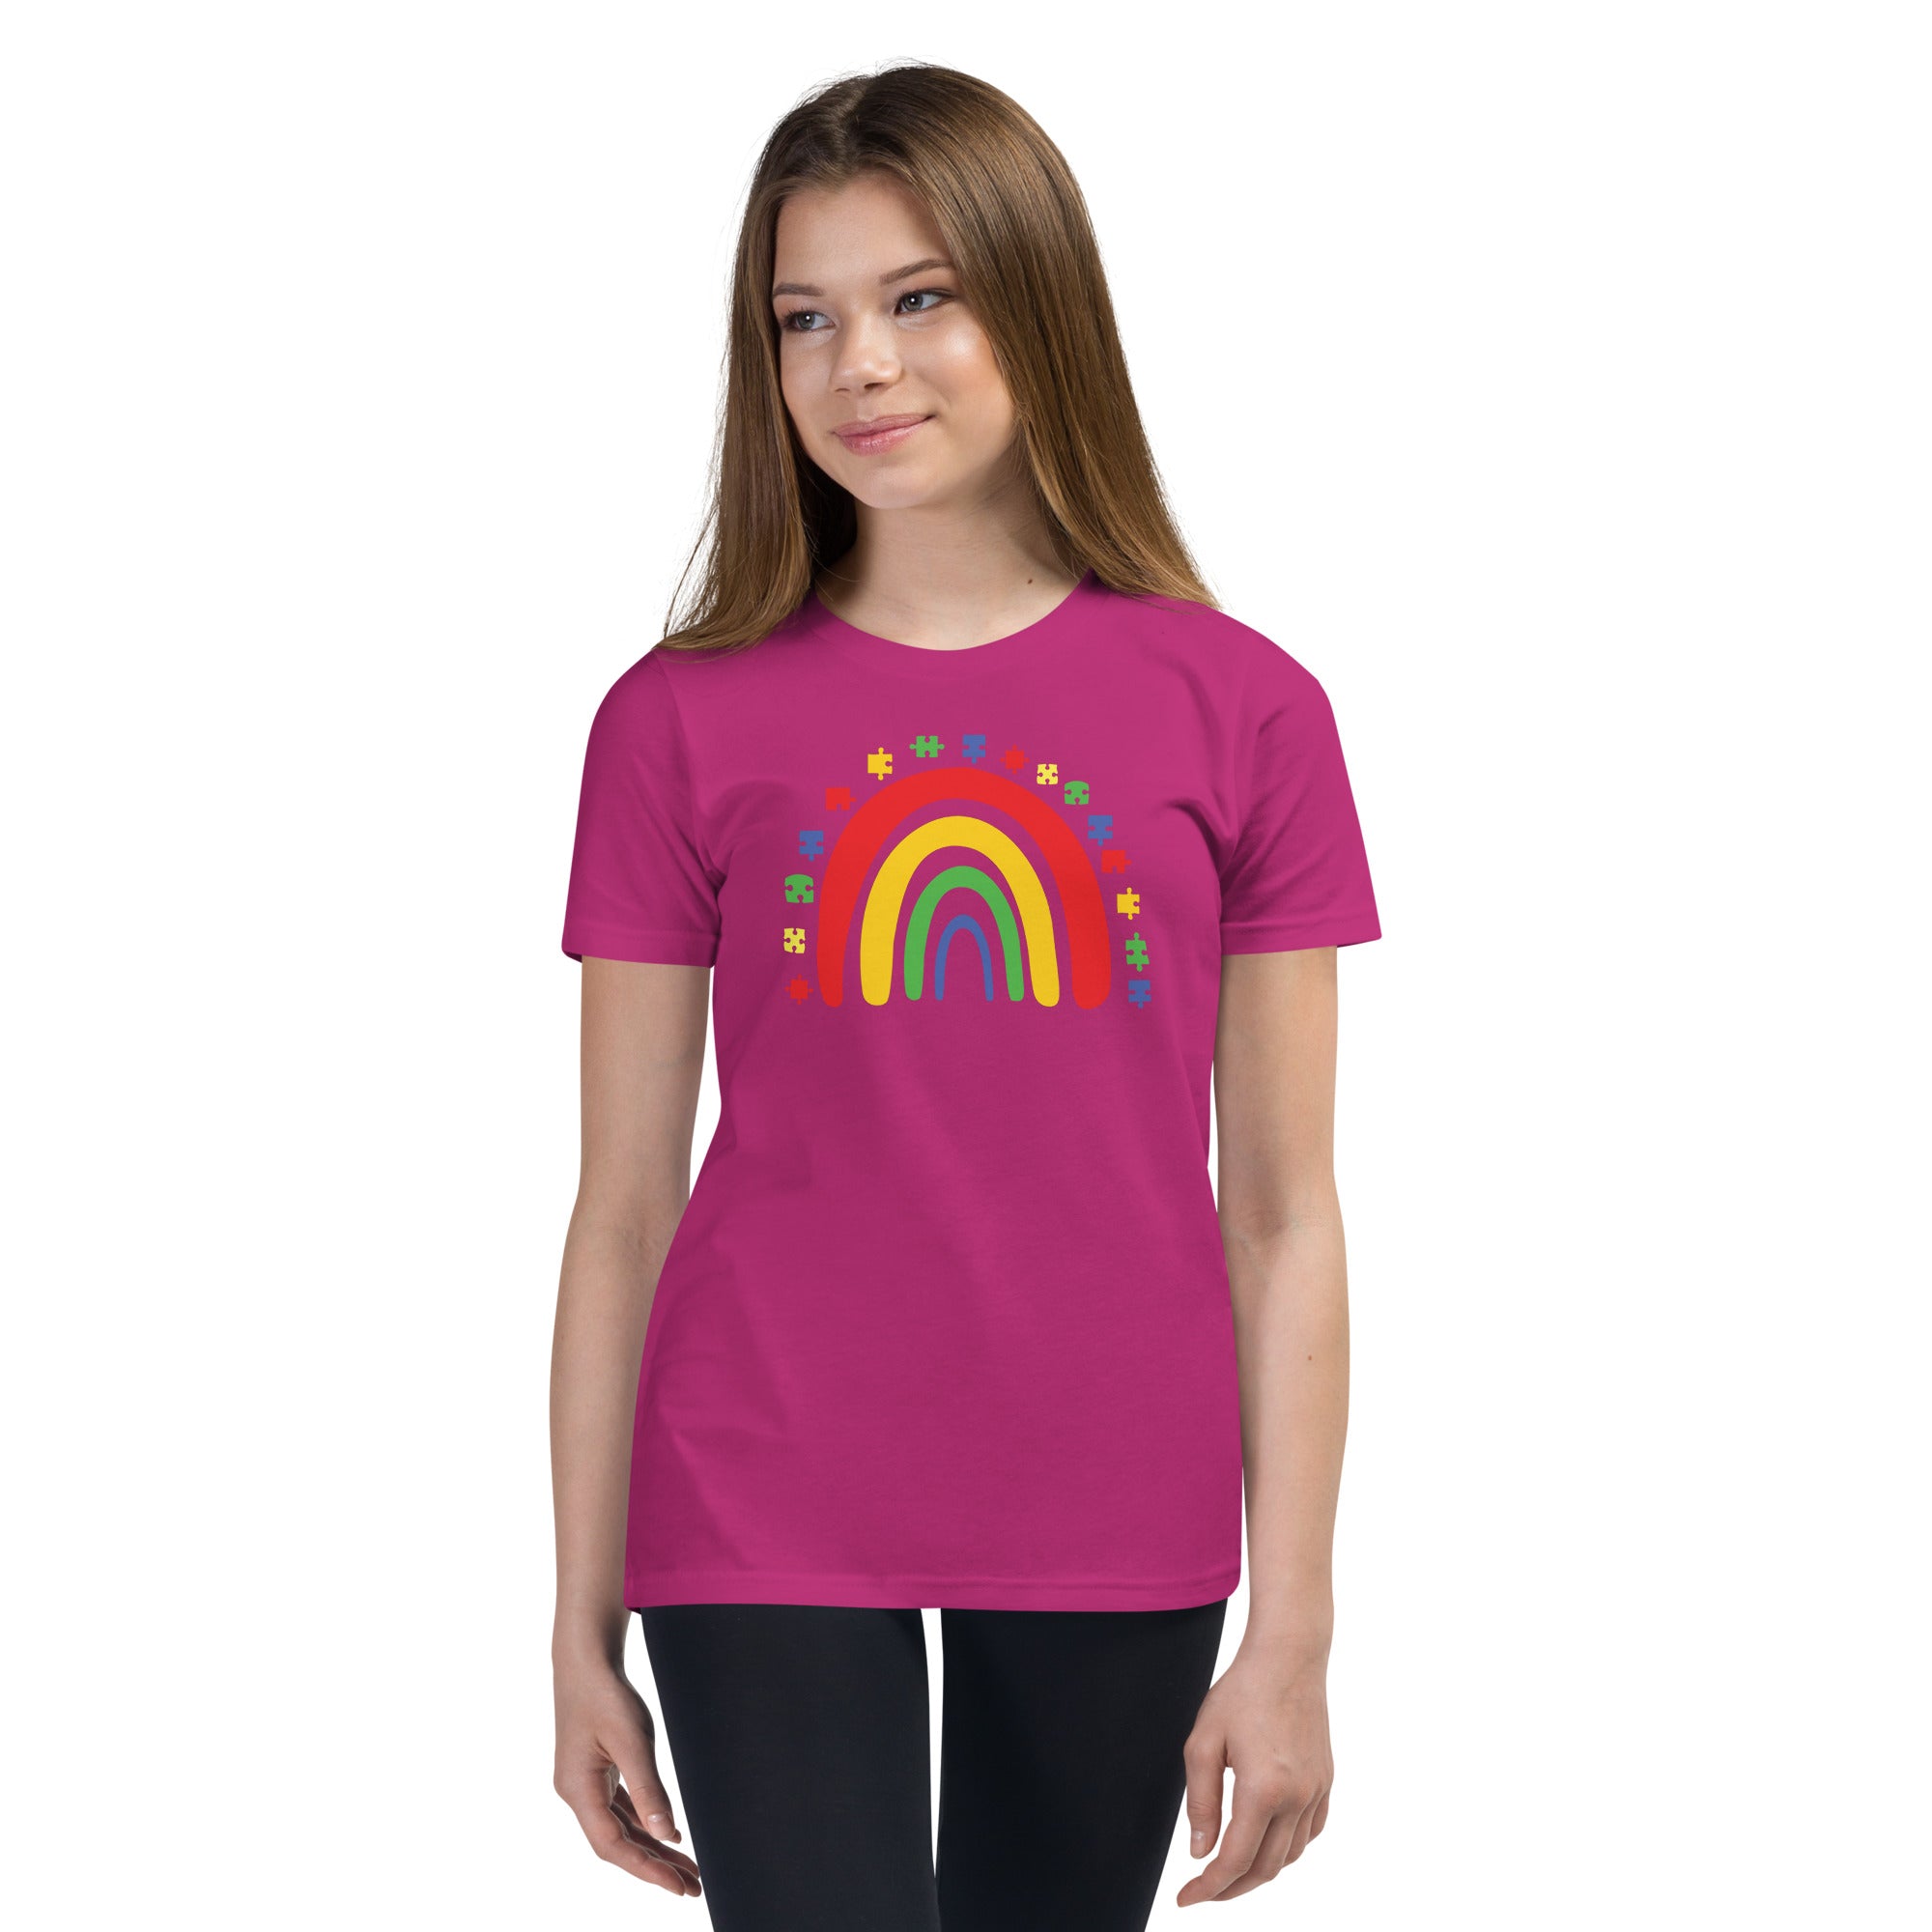 Autism Rainbow Youth Graphic Tees